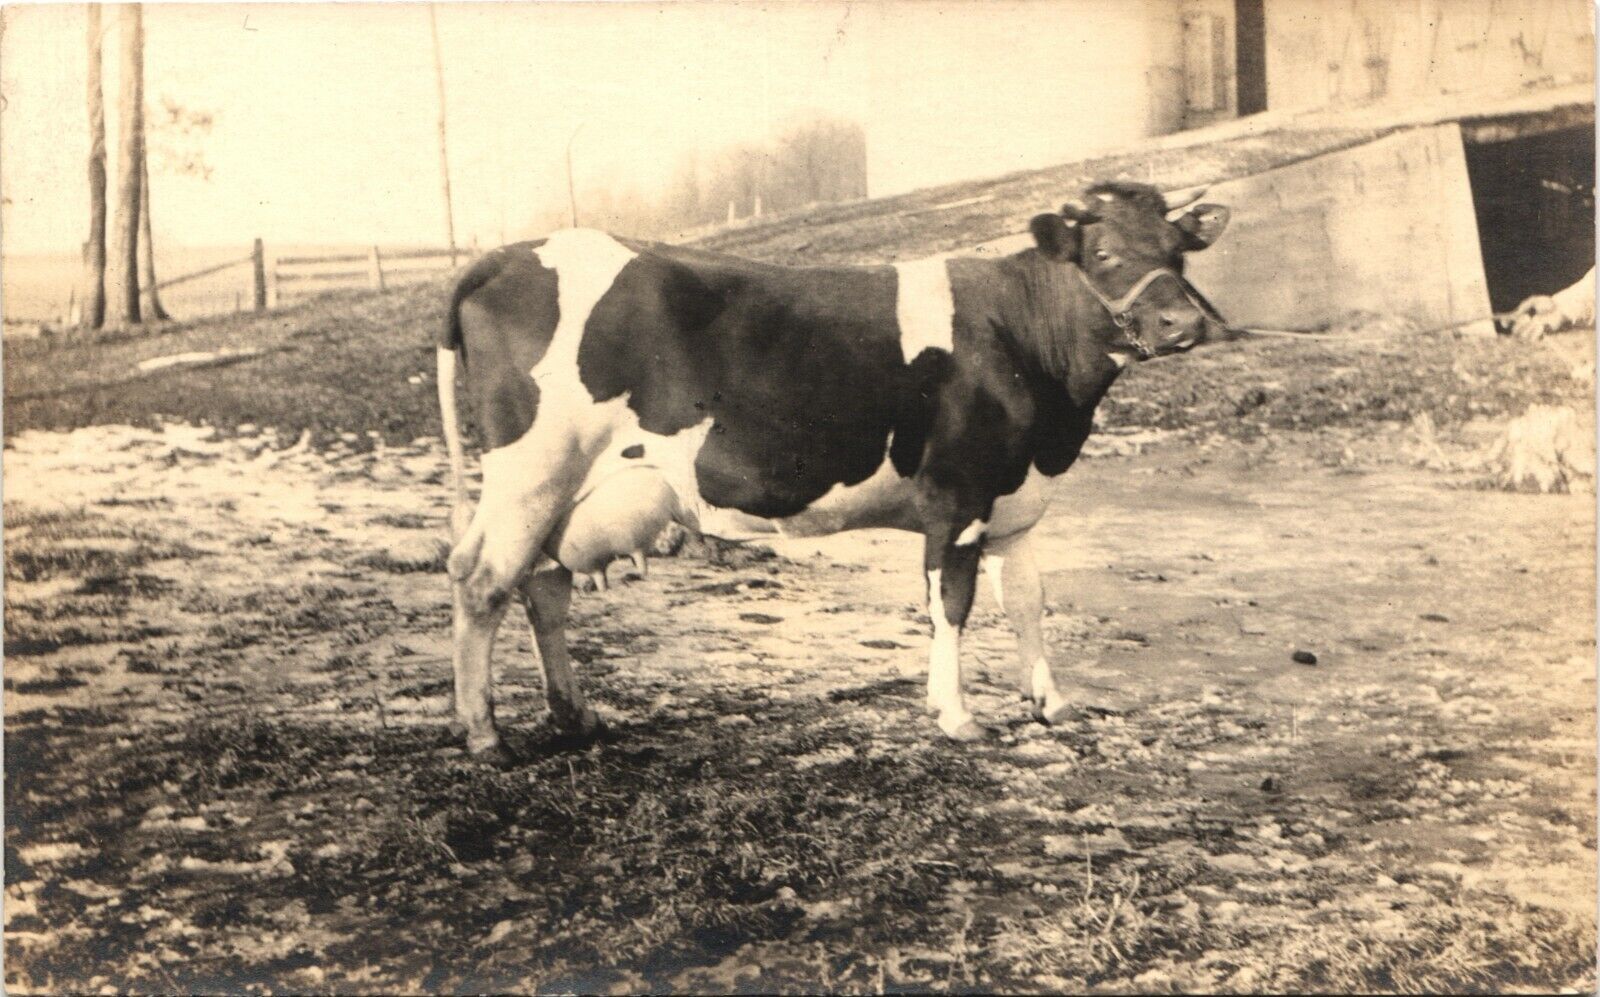 DAIRY COW real photo postcard rppc AGRICULTURAL FARM VIEW c1910